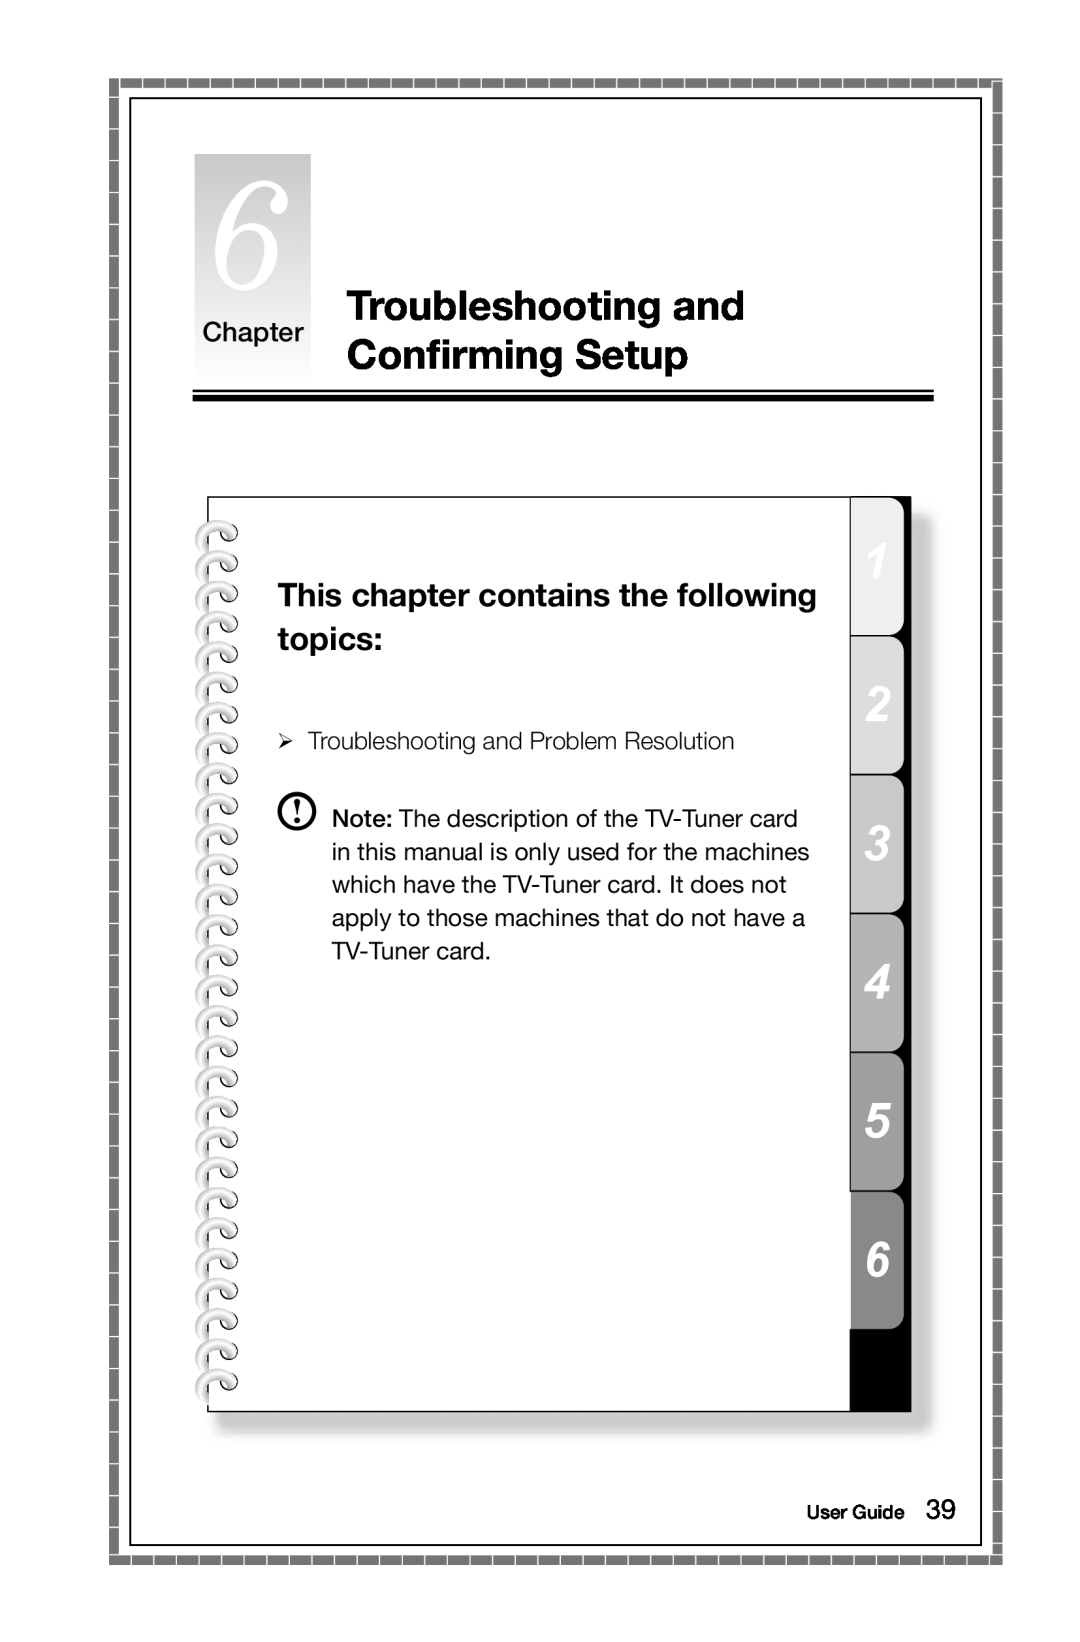 Lenovo 10052, B3 manual Troubleshooting and Chapter Confirming Setup, This chapter contains the following topics, User Guide 